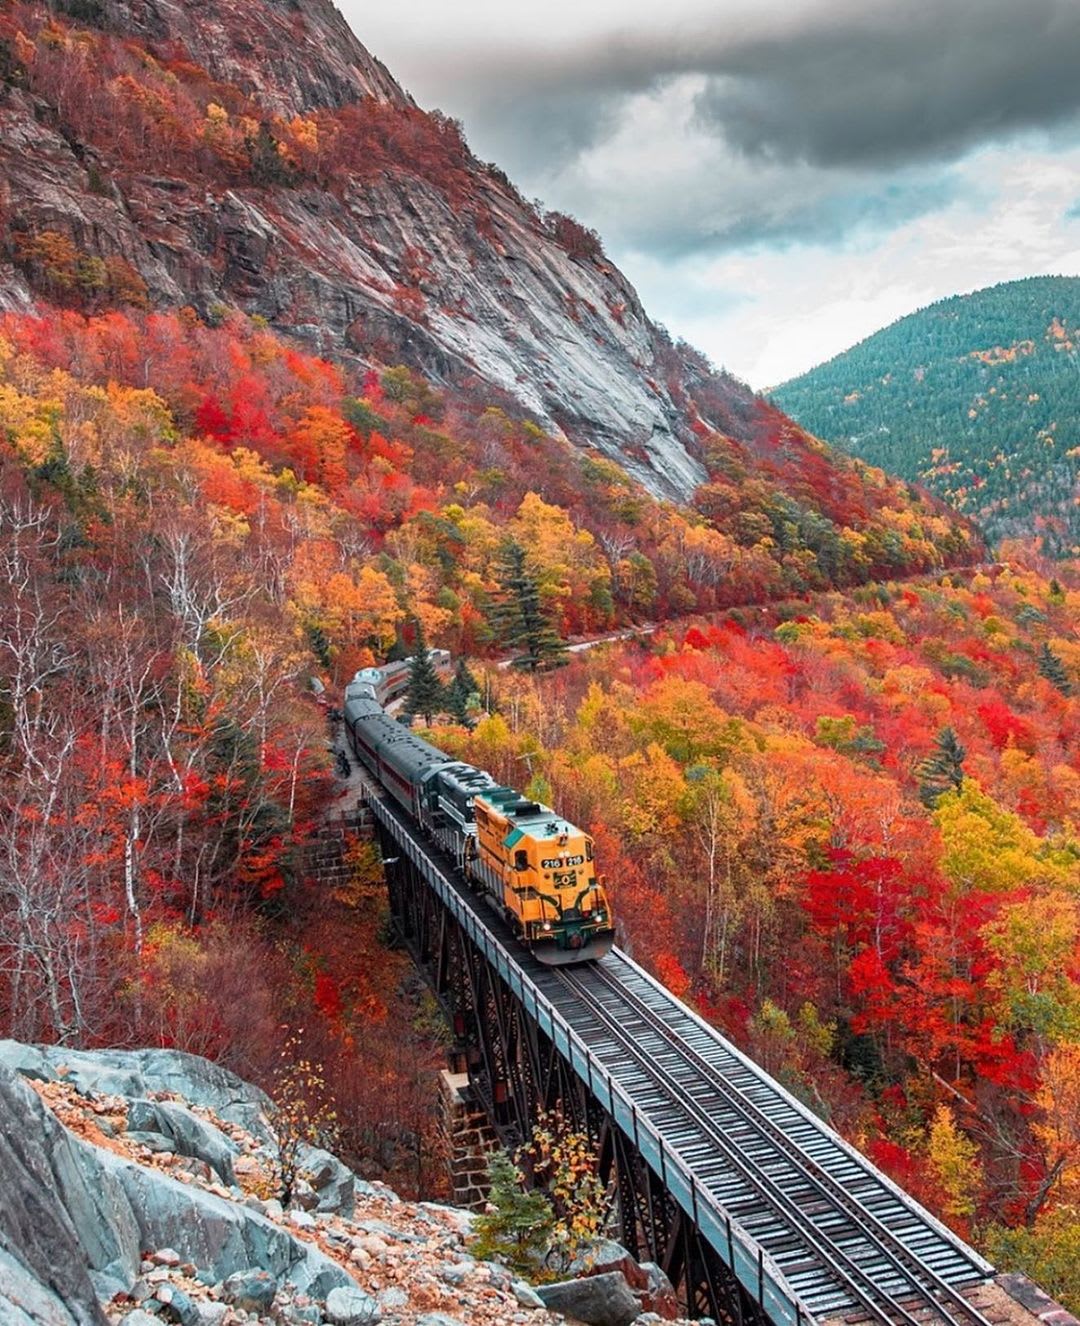 Conway Scenic Railroad train in the White Mountains region of New Hampshire.